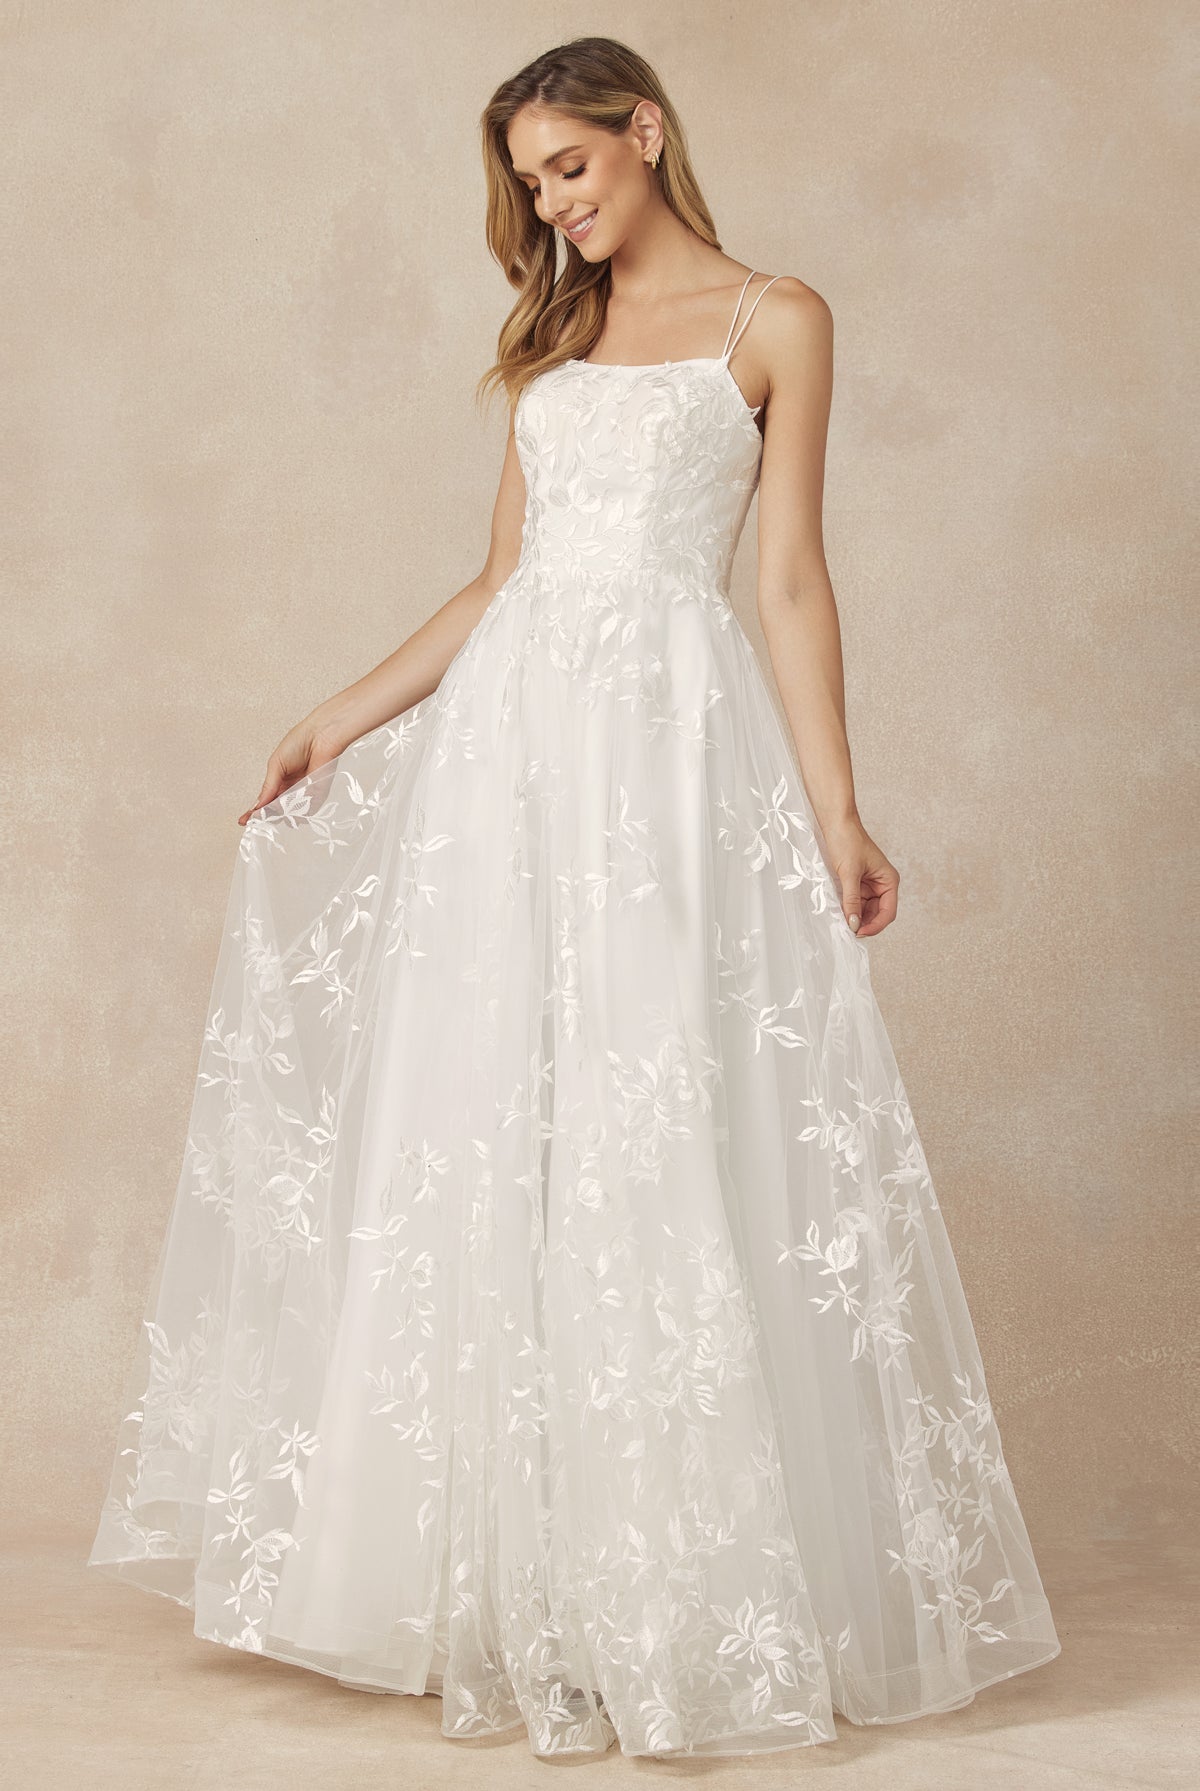 A- line wedding gown